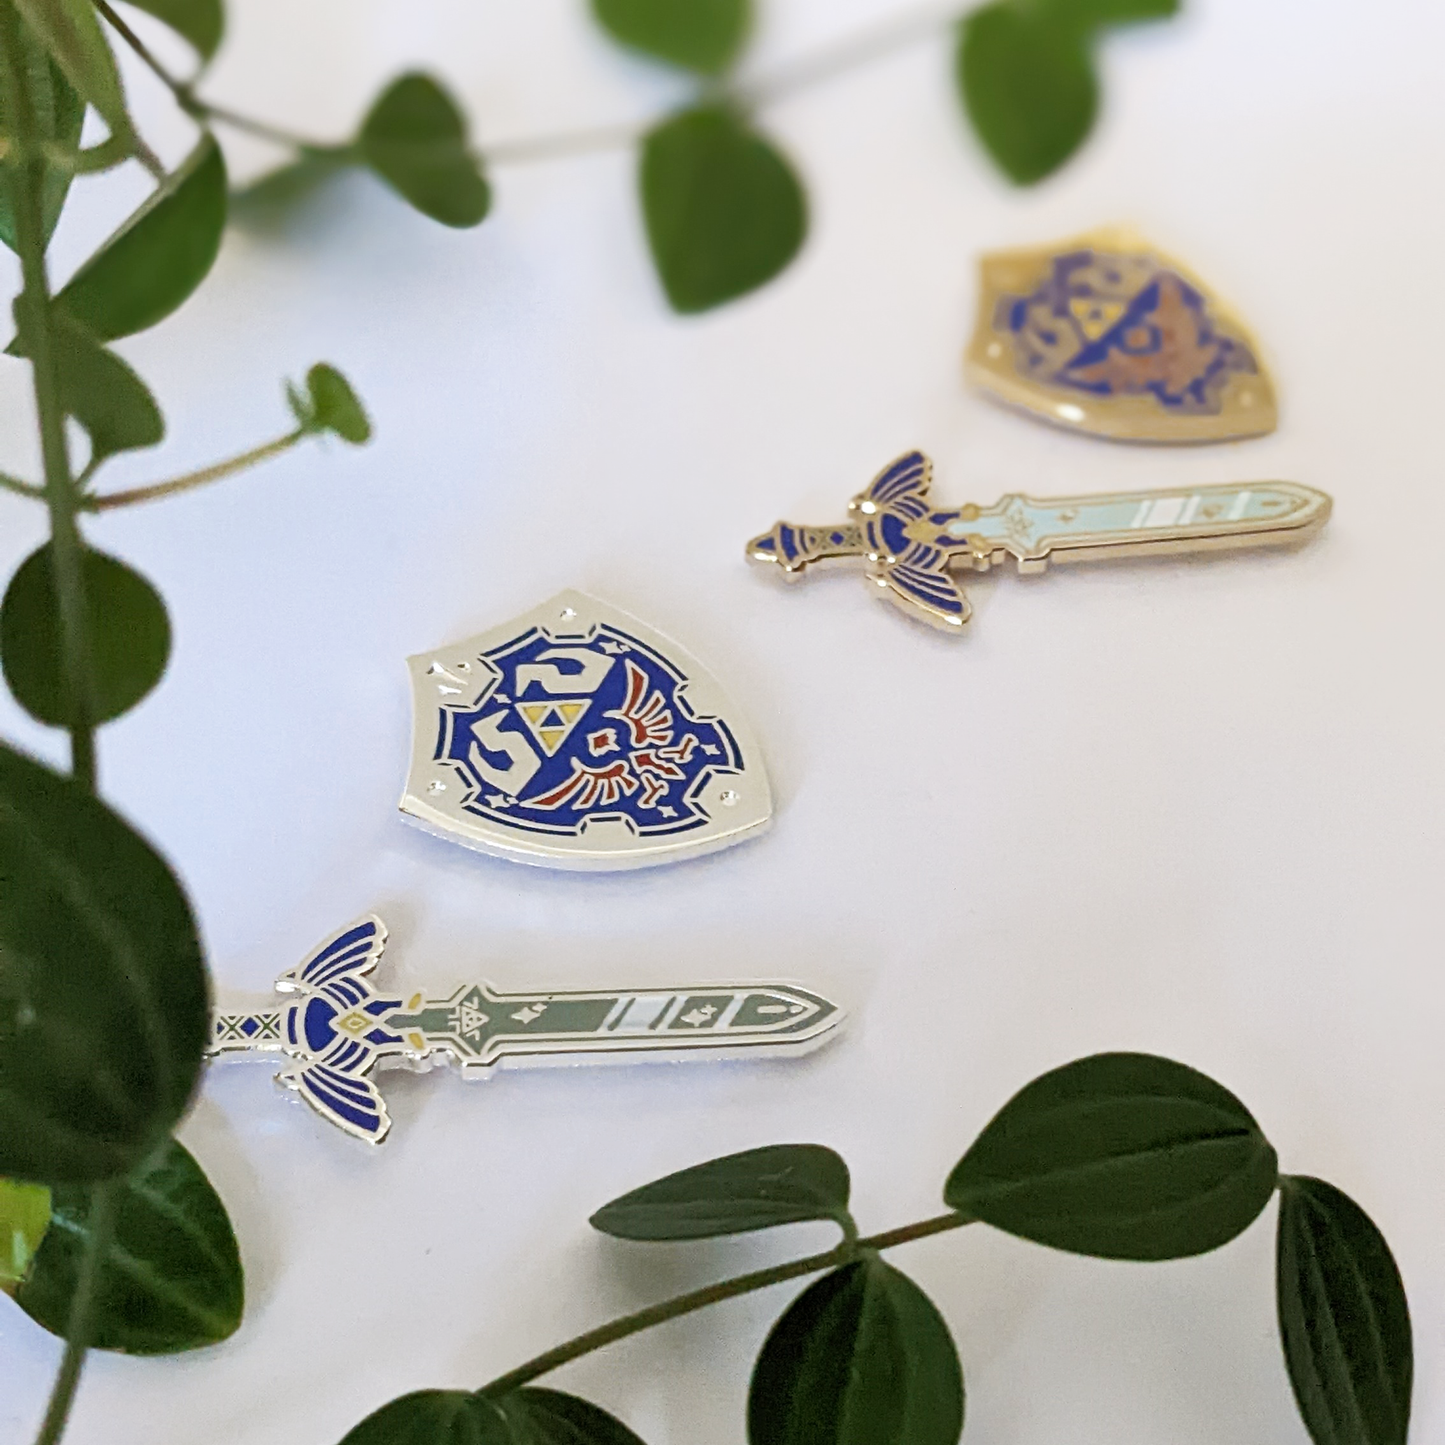 Pin Sets - Master Sword & Hyrule Shield - Gold & Silver